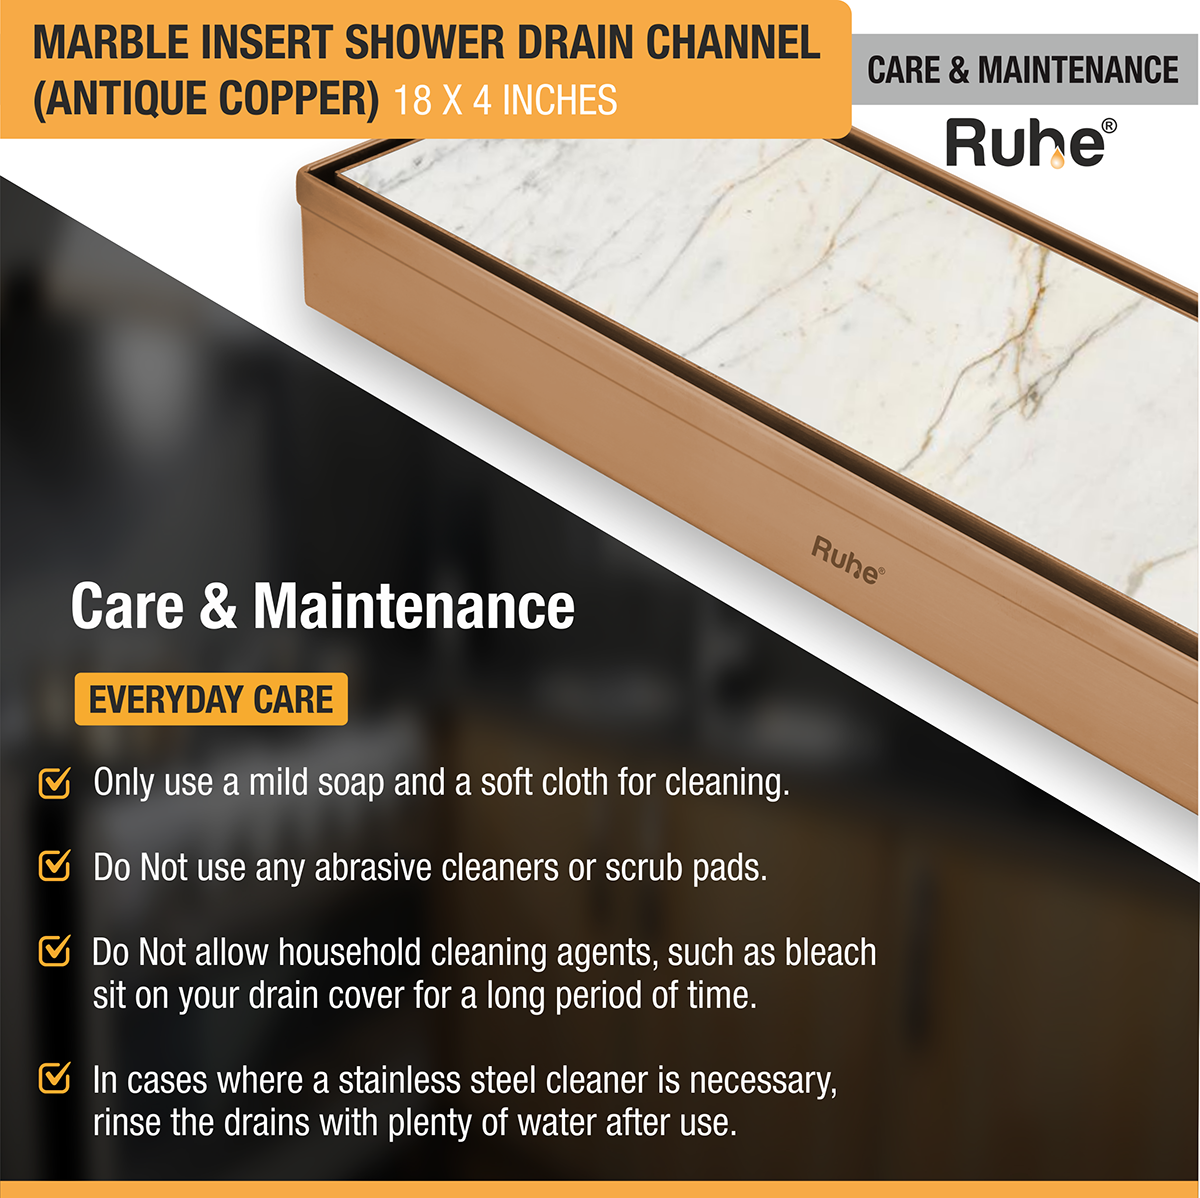 Marble Insert Shower Drain Channel (18 x 4 Inches) ROSE GOLD PVD Coated care and maintenance